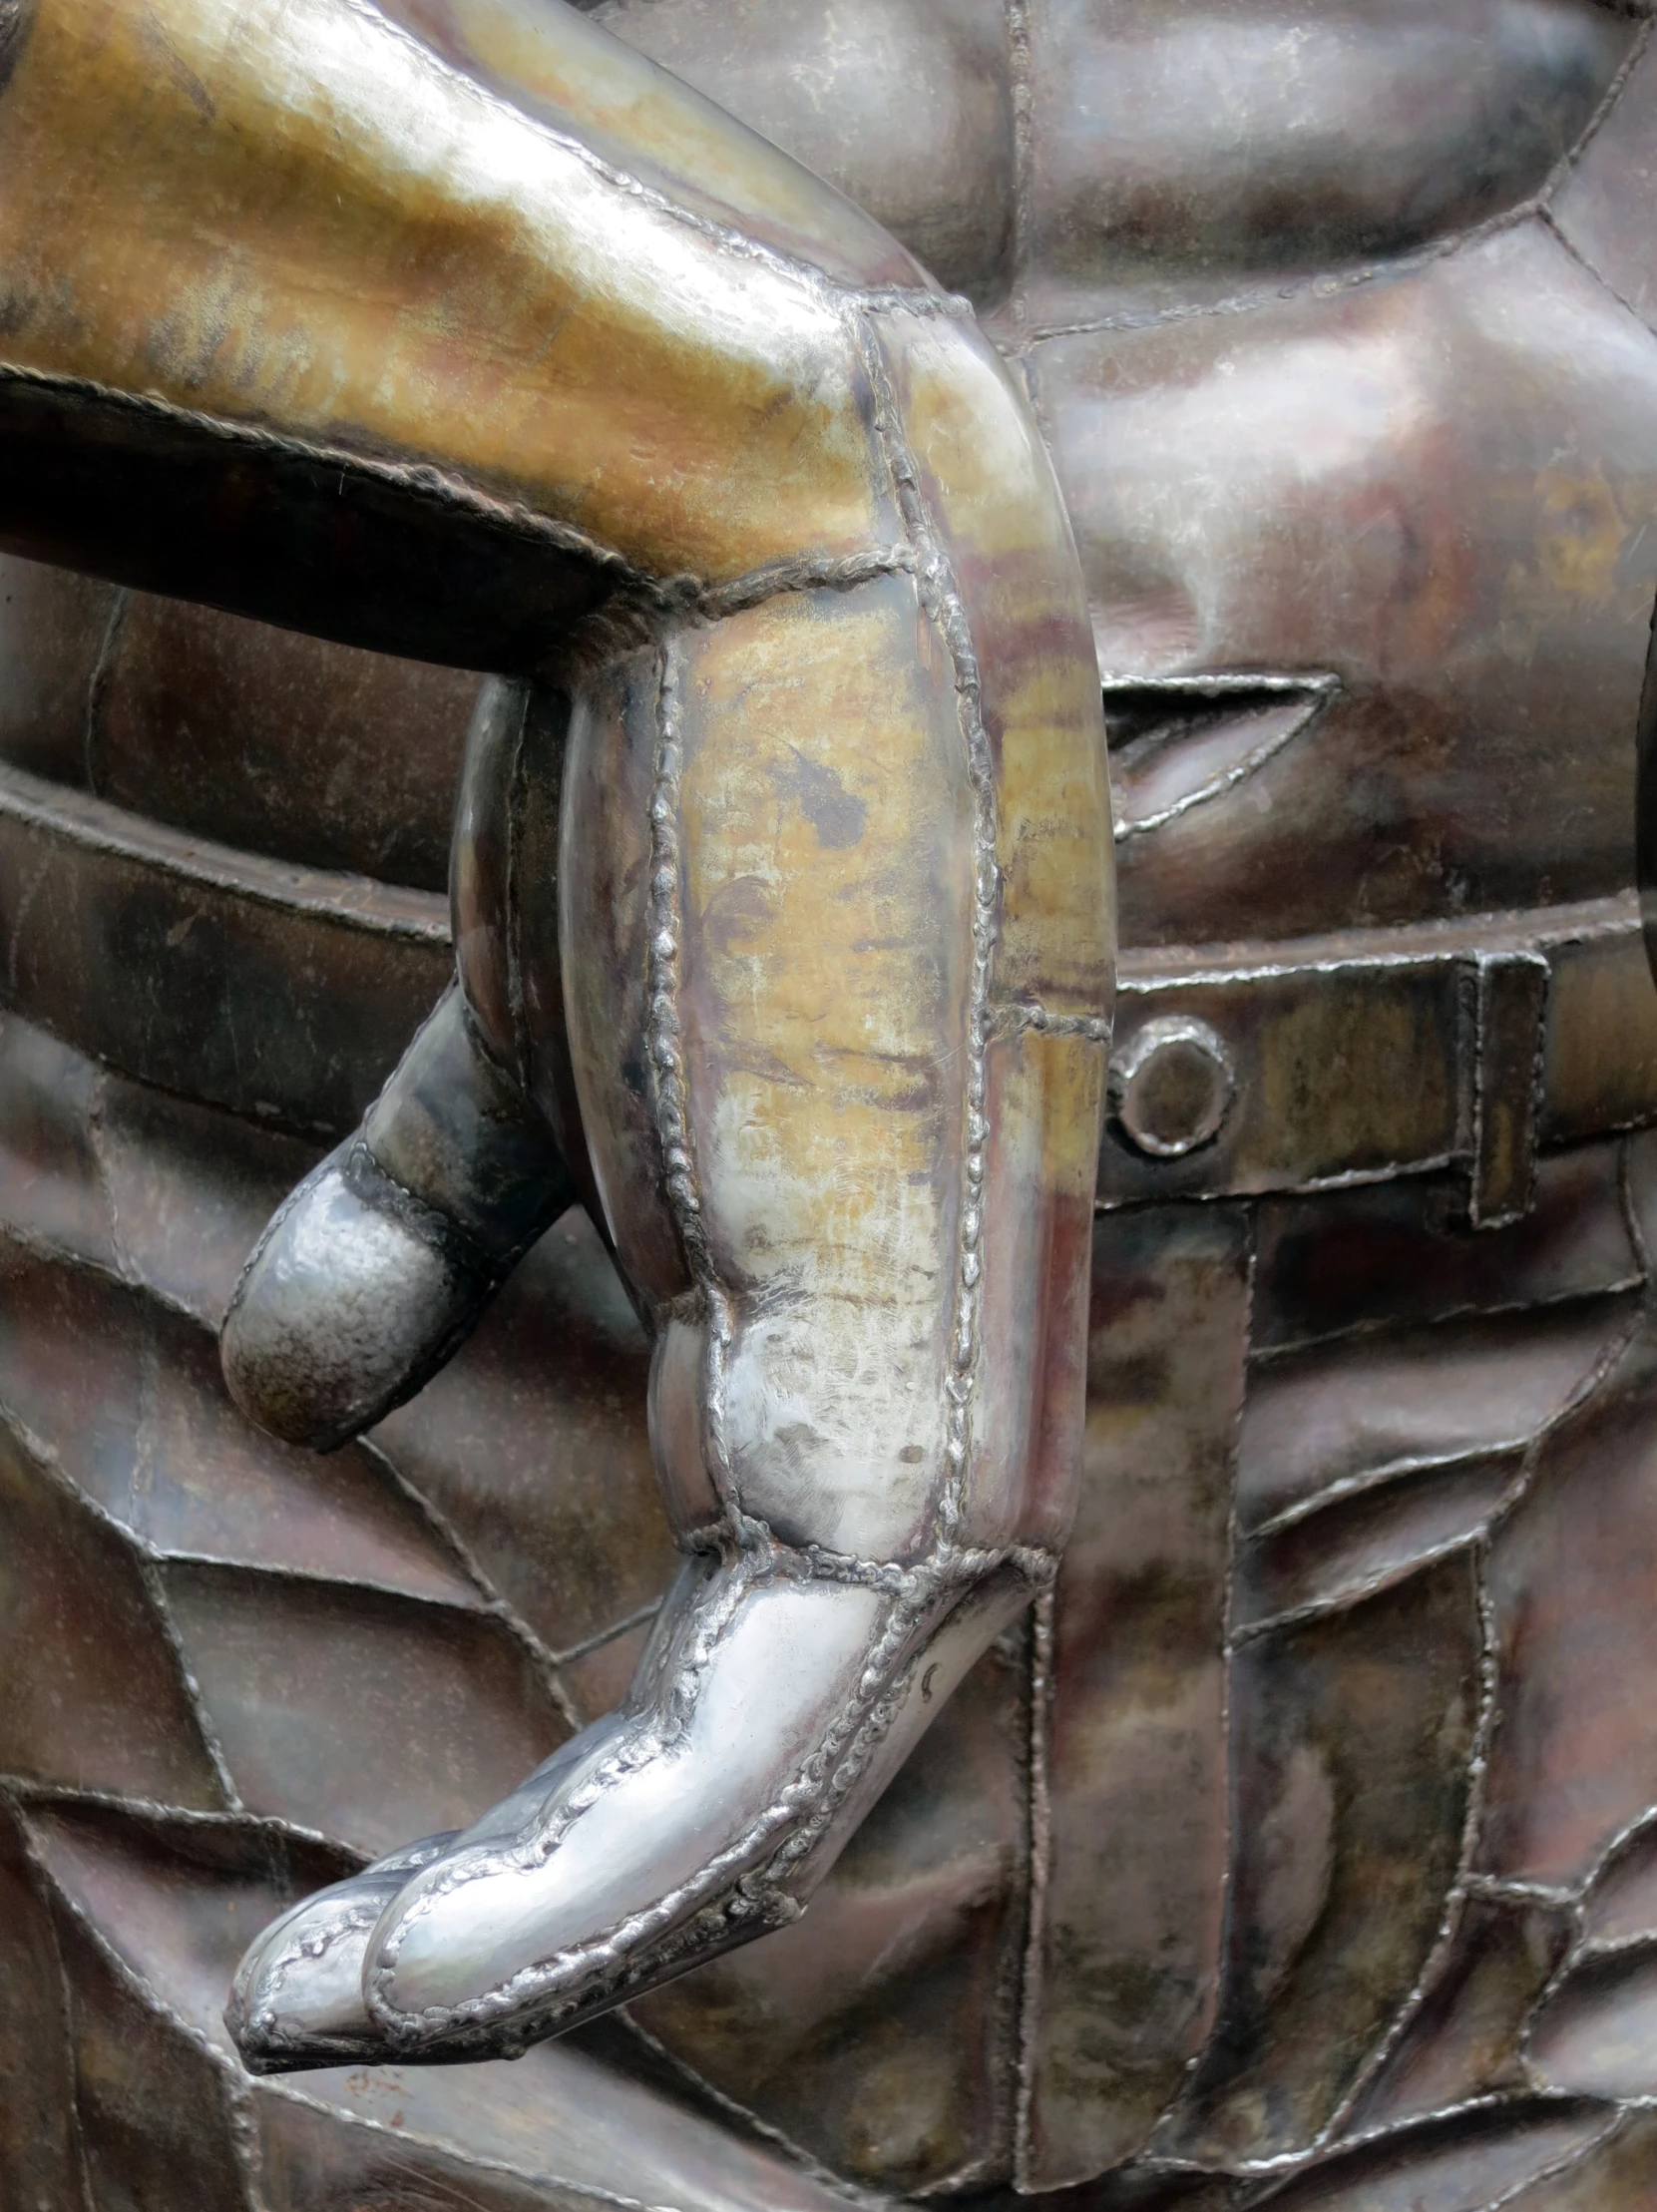 a statue of a baseball player's helmet and arm